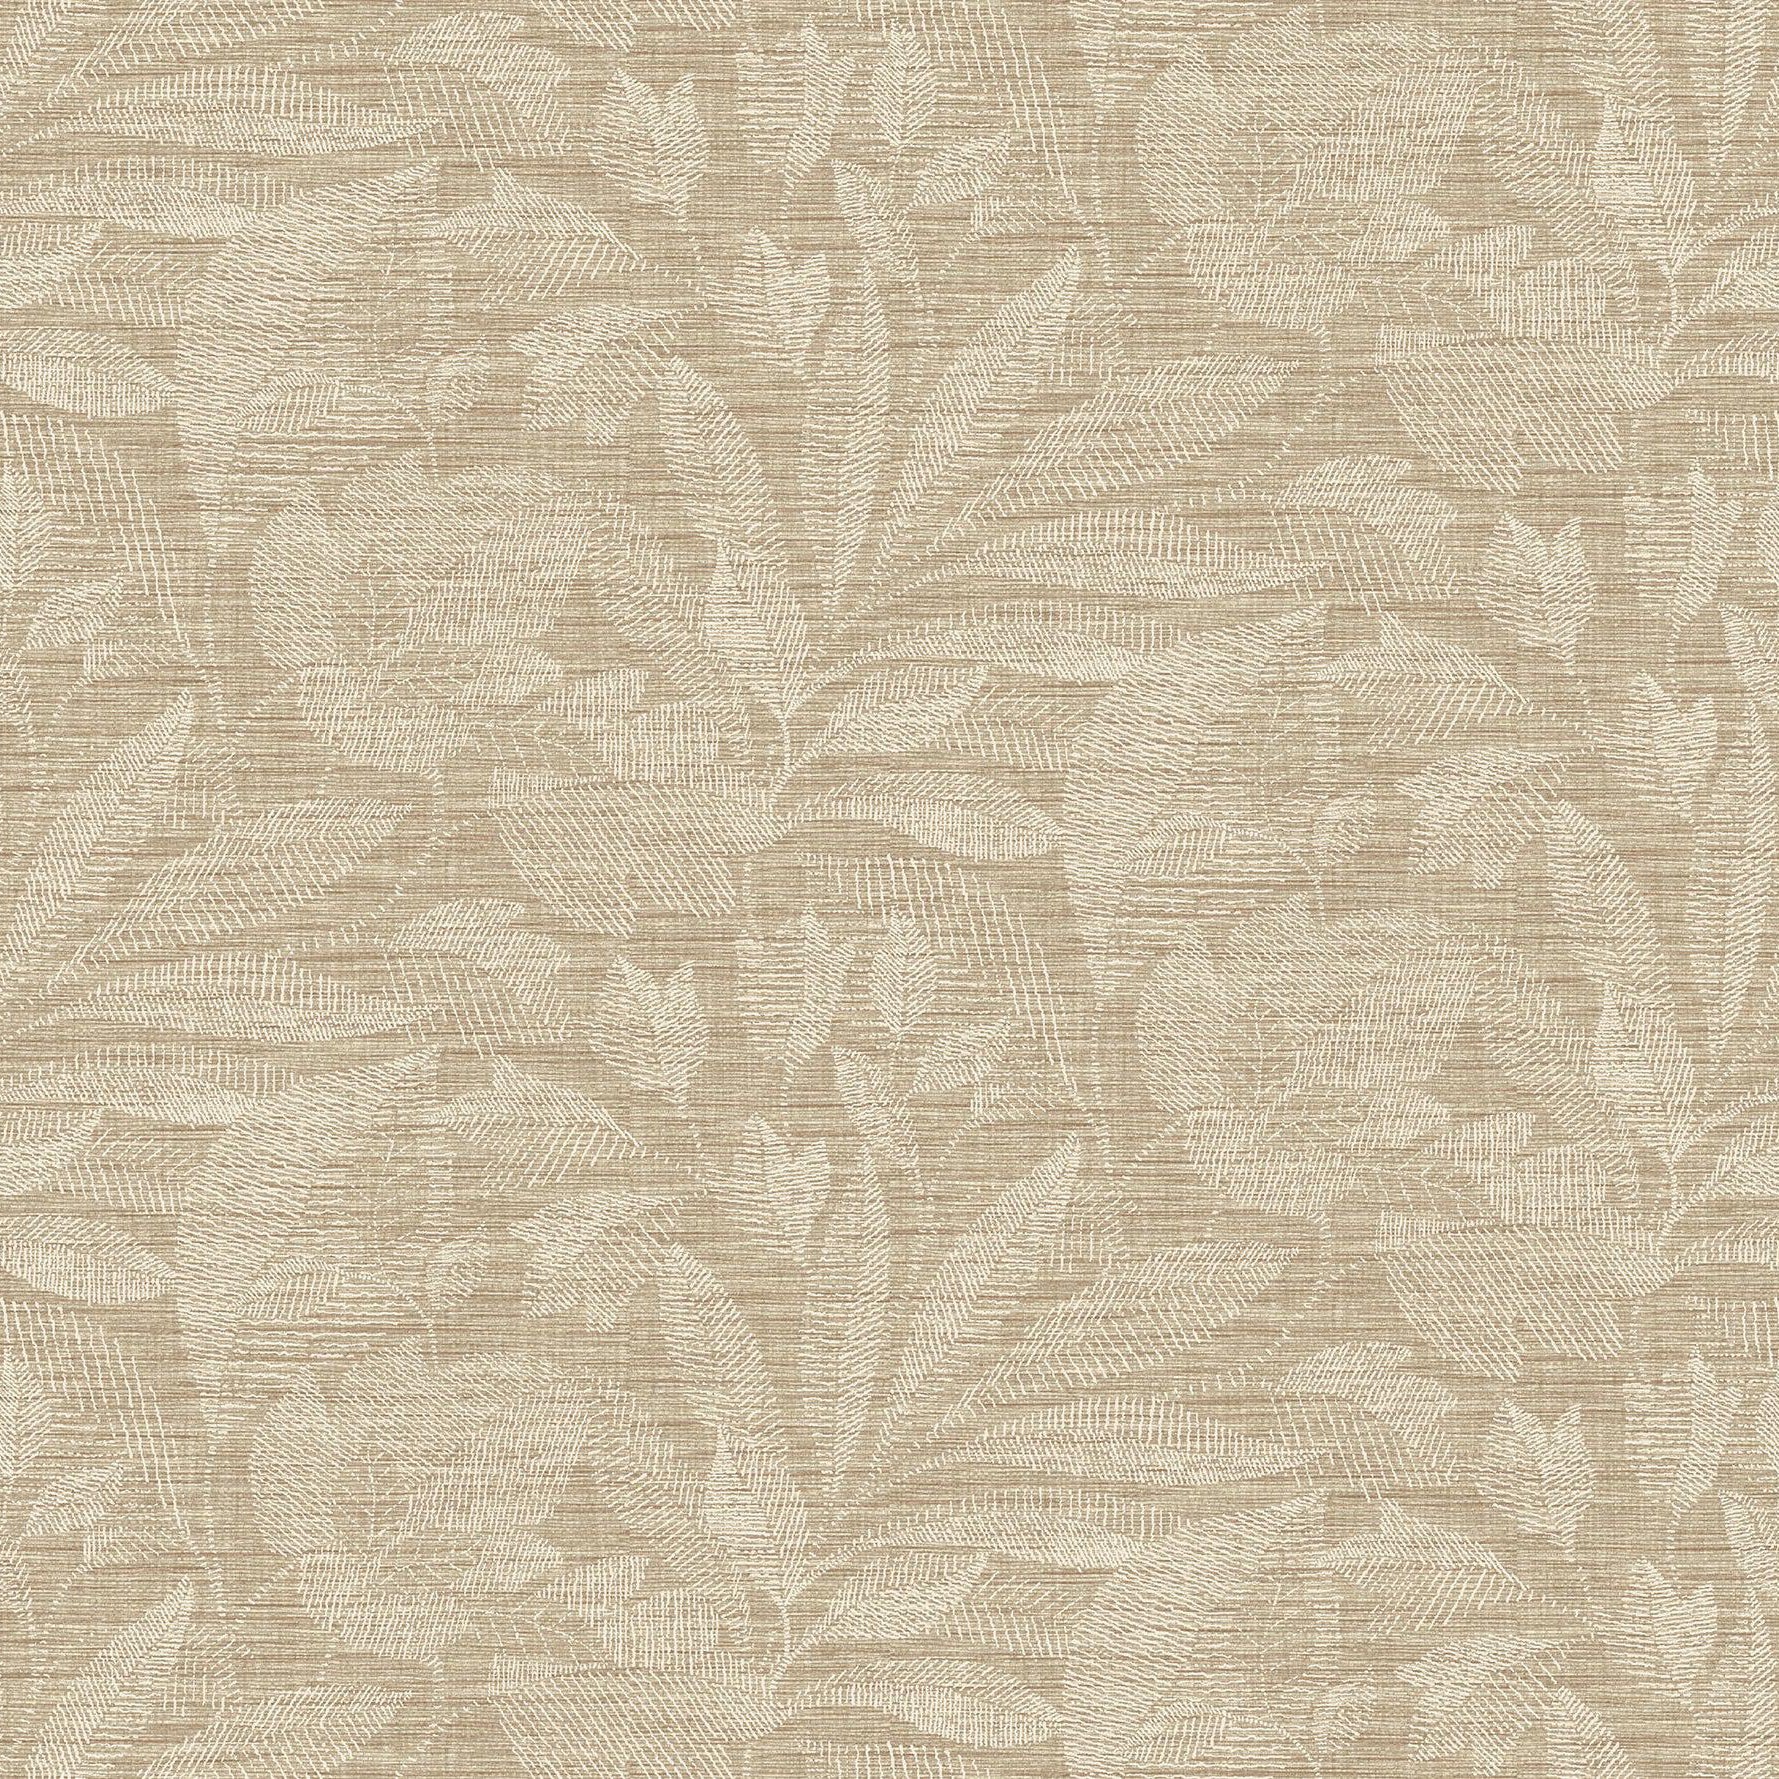 Order 2971-86155 Dimensions Lei Wheat Etched Leaves Wheat A-Street Prints Wallpaper